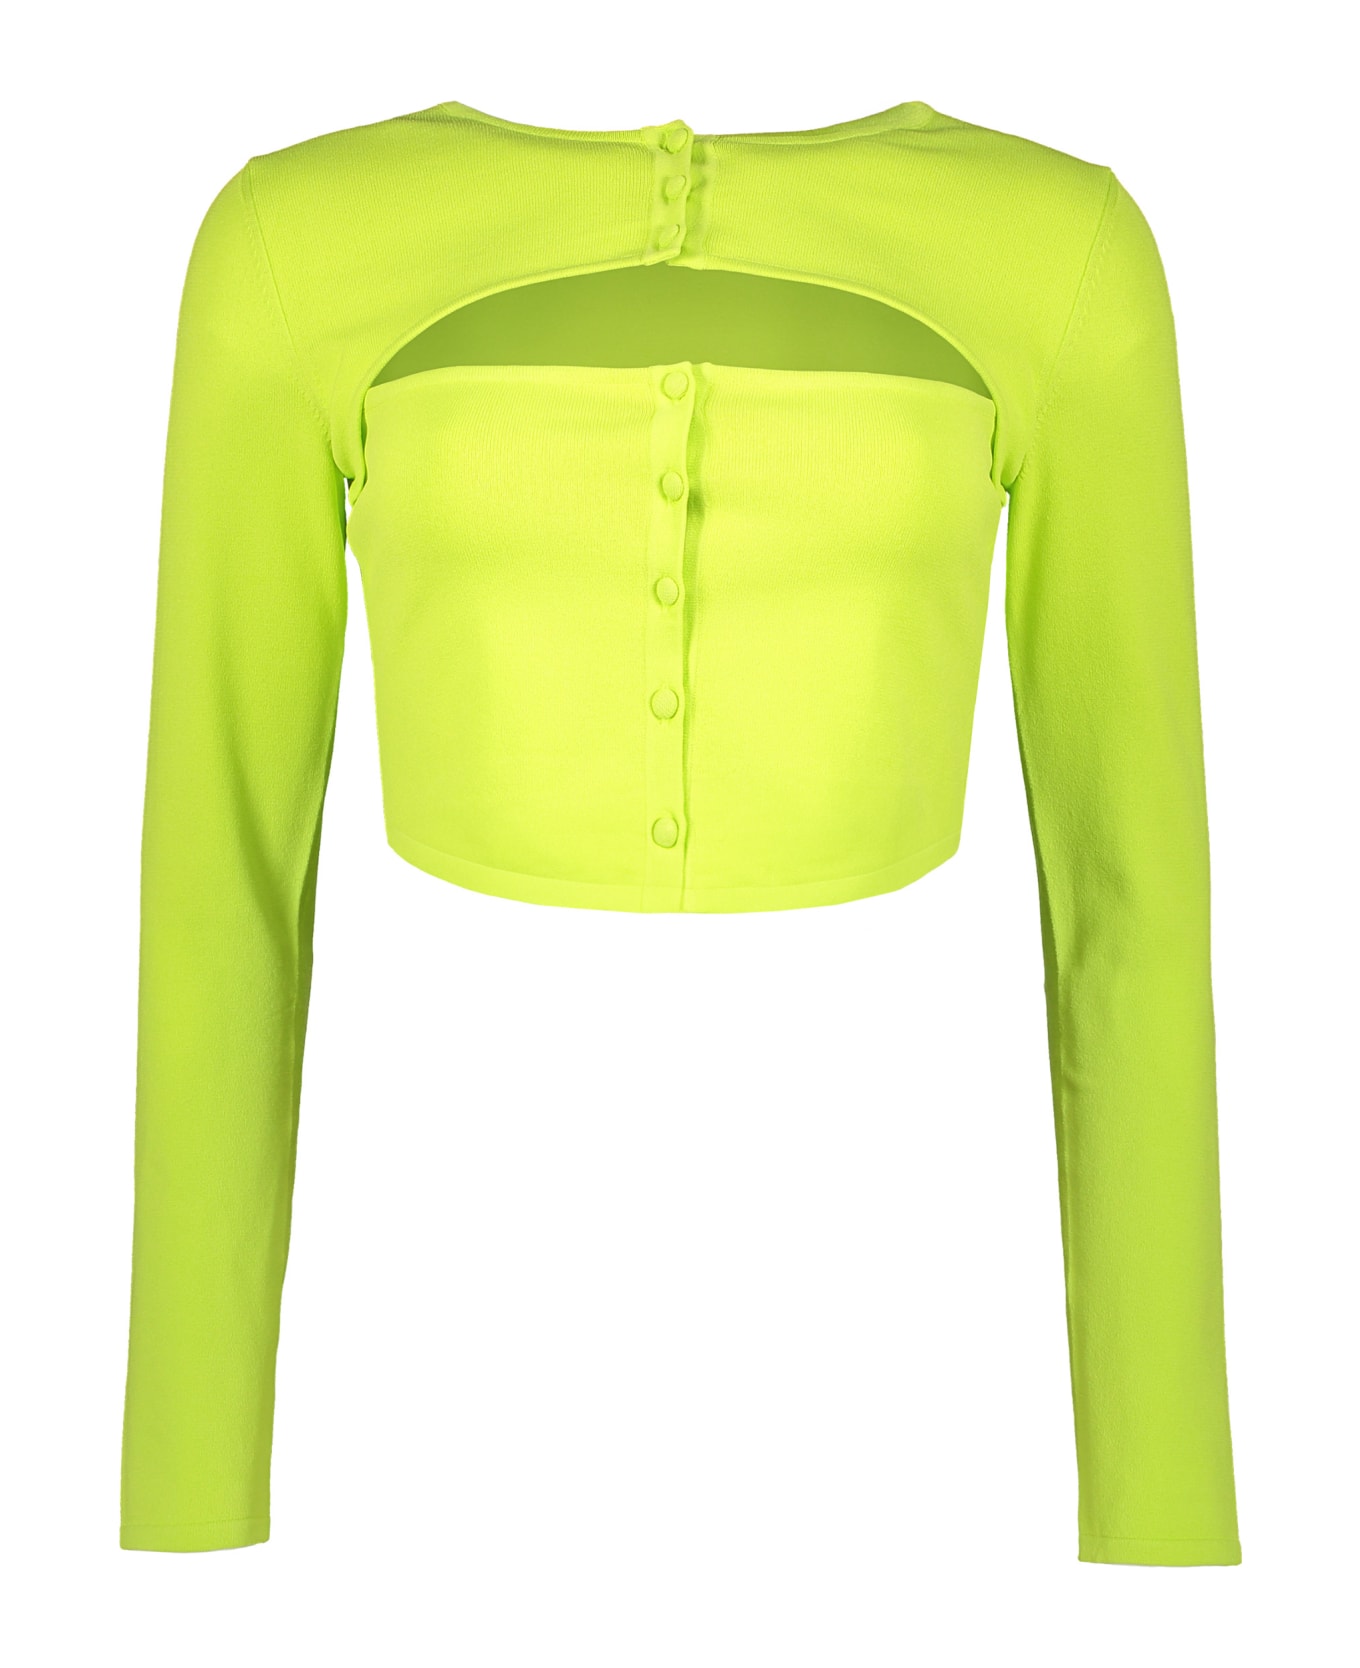 Dsquared2 Long Sleeve Crop Top - green